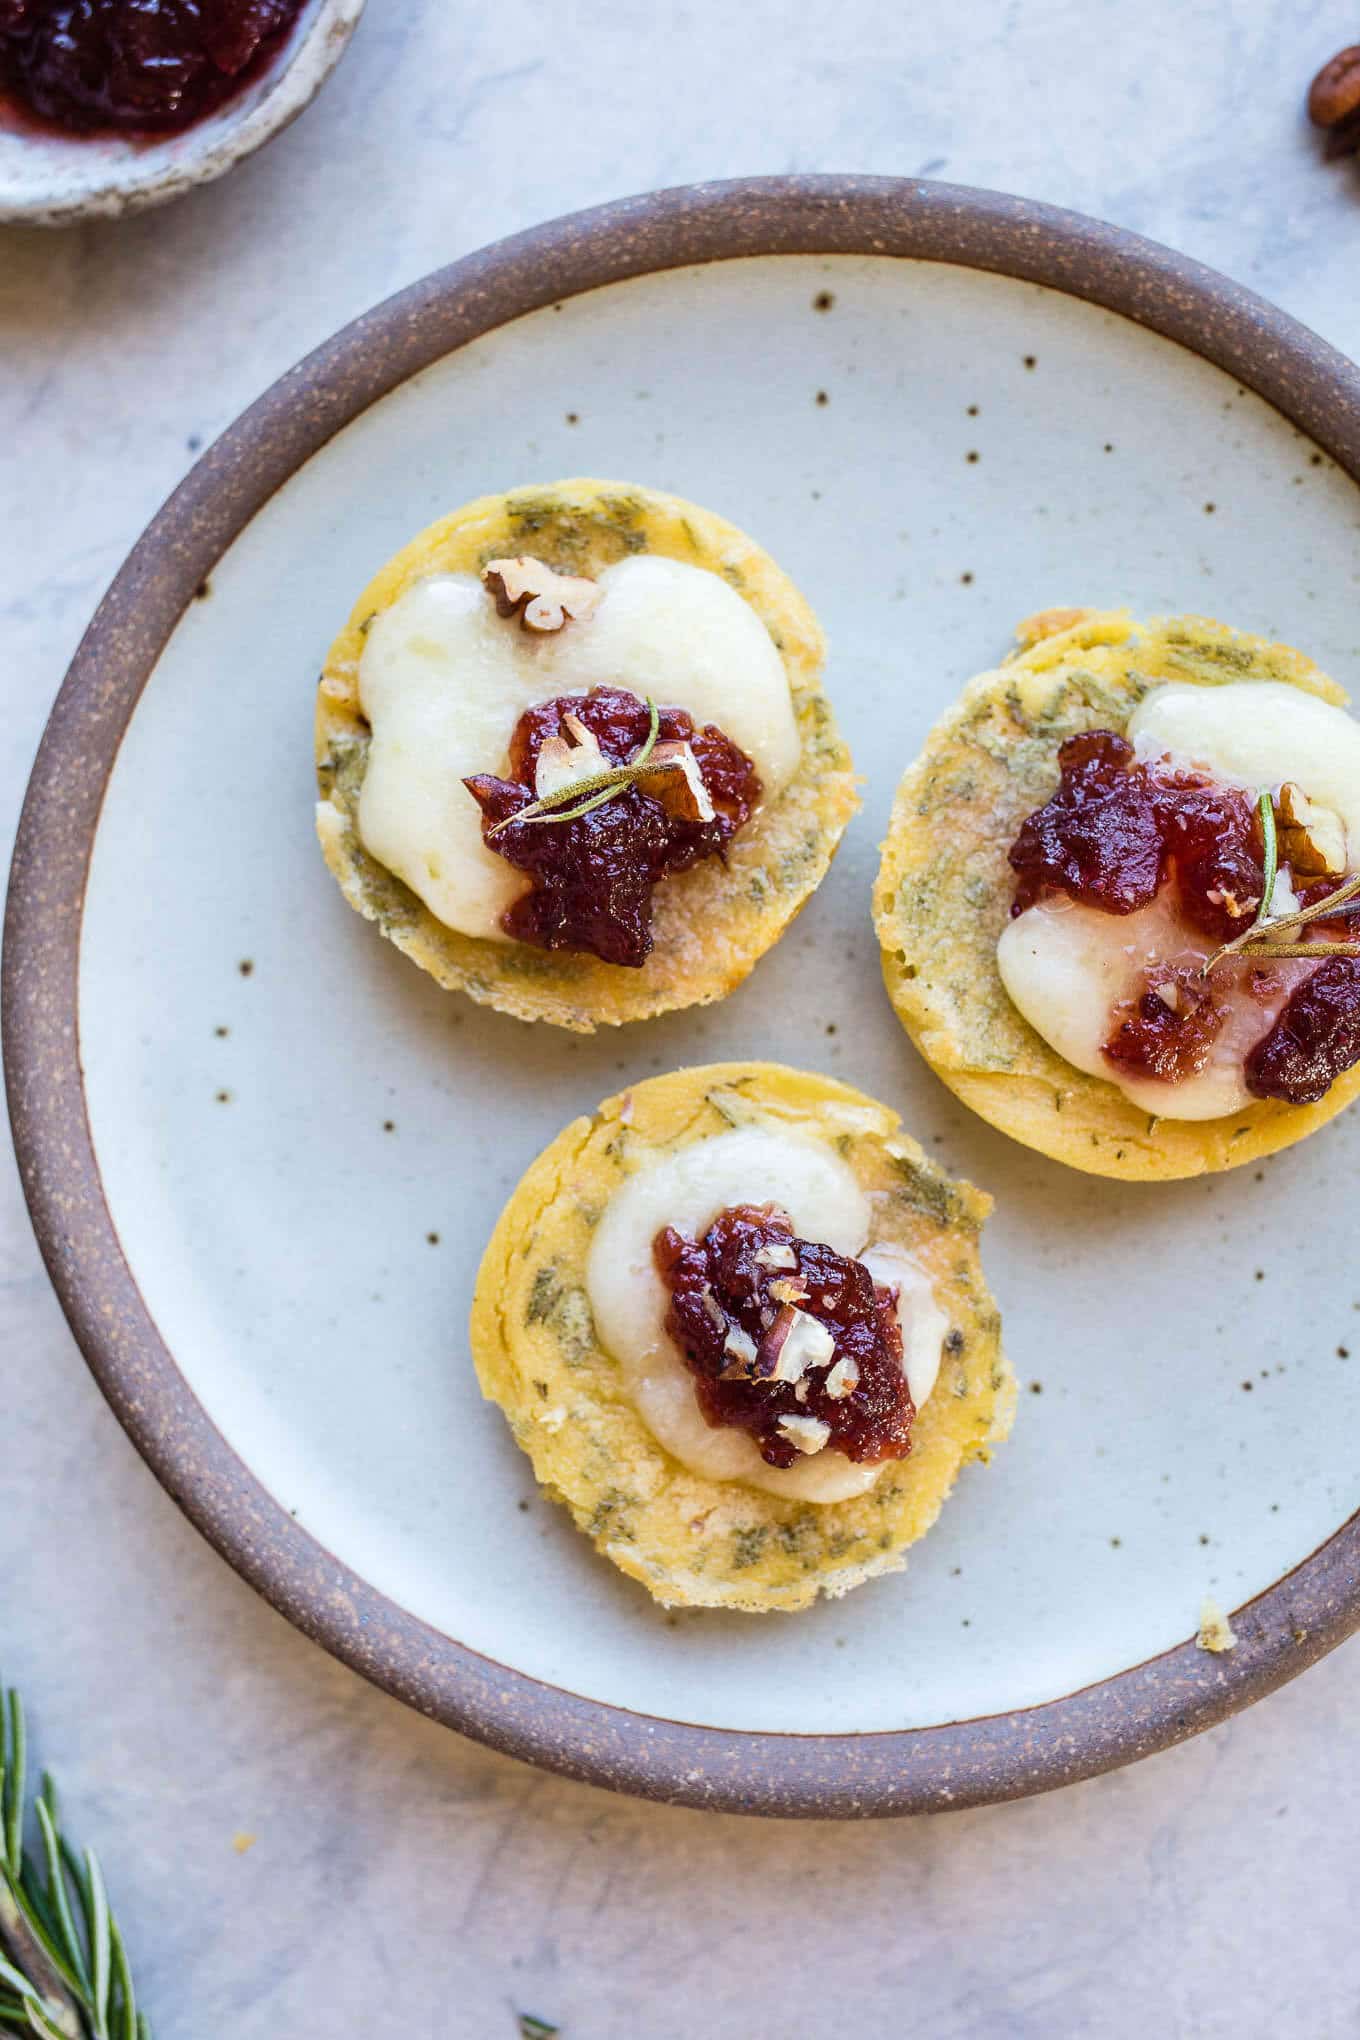 Socca Cranberry Brie Bites are an easy appetizer recipe made from naturally gluten-free chickpea flatbread, brie, cranberry relish, and chopped pecans. Gluten-free.